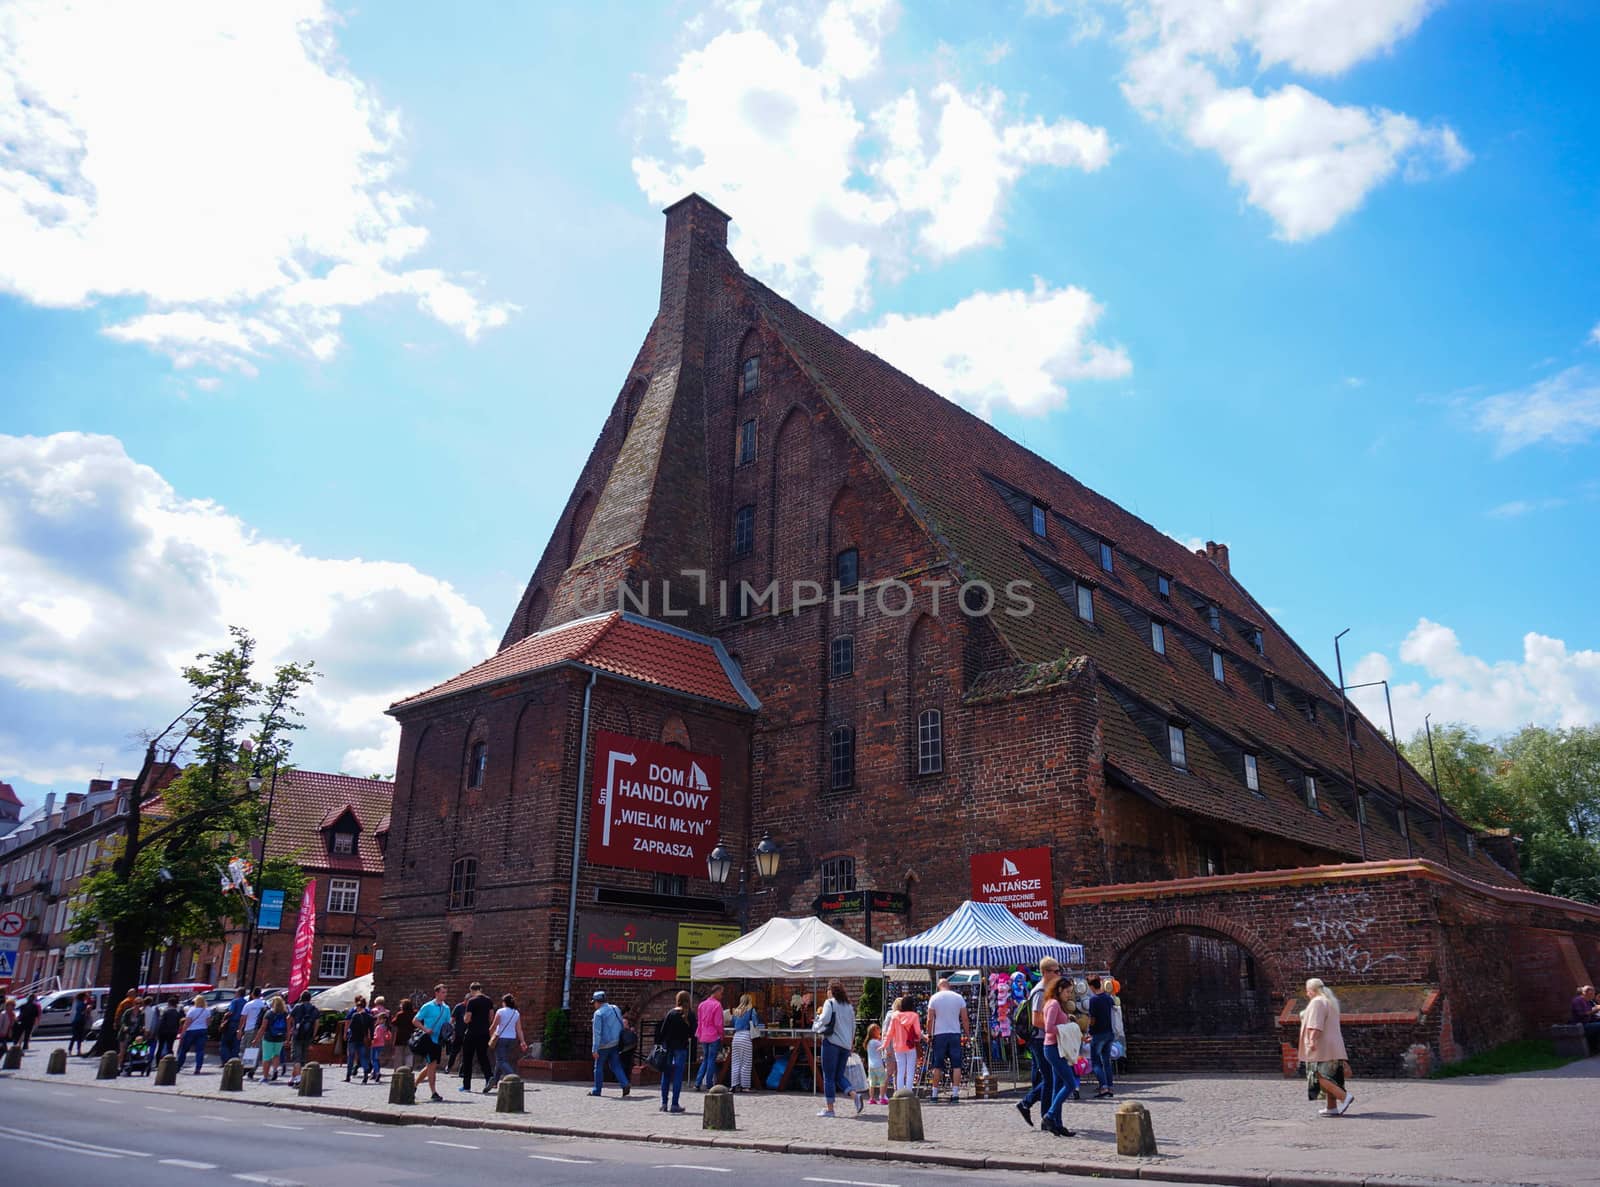 GDANSK, POLAND - JULY 29, 2015: People walking next to the old trade building at the city center